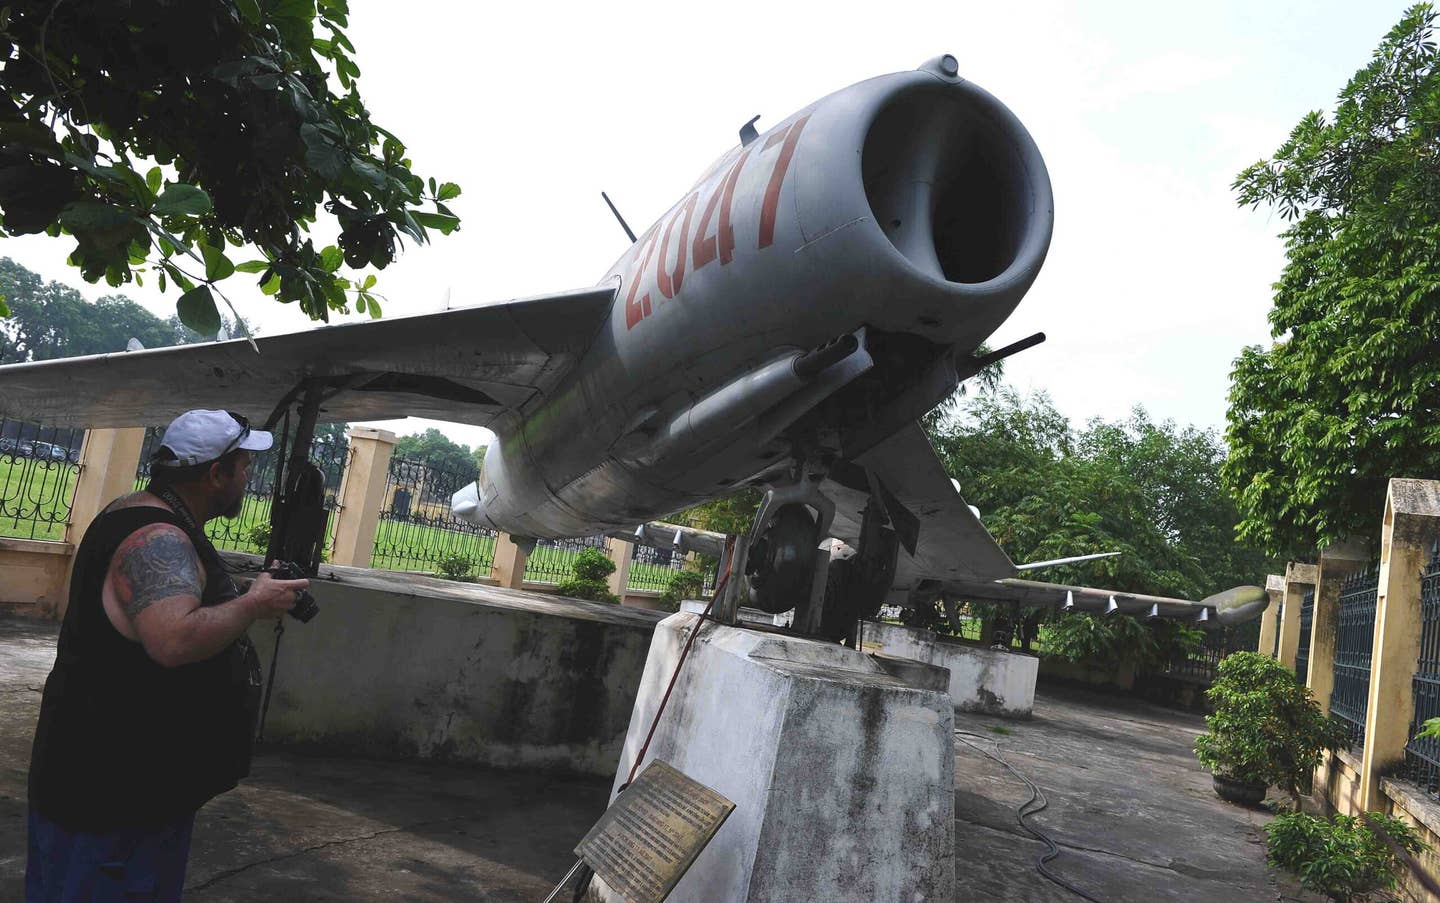 A foreign tourist looks at a Soviet-made MiG-17F jet used during the Vietnam War and now on display at the VPAF Museum in Hanoi. This aircraft, which was eventually credited with seven air-to-air kills, was configured as a fighter-bomber when flown by Nguyen Van Bay in an attack on the cruiser USS <em>Oklahoma City</em> on April 19, 1972. <em>HOANG DINH NAM/AFP/GettyImages</em>